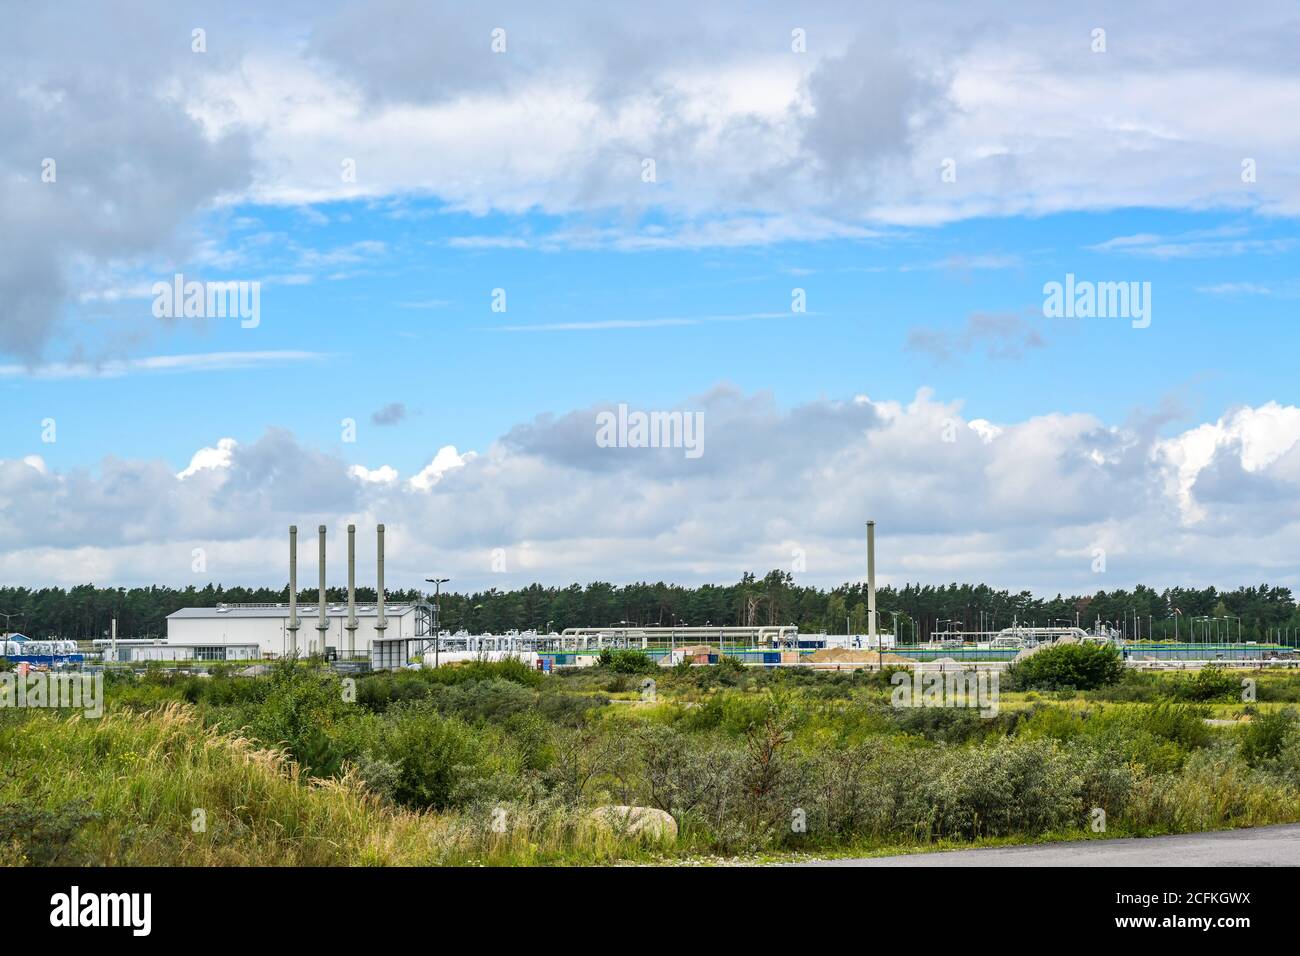 Nord stream in the industrial area of Lubmin near Greifswald, landfall of the natural gas pipeline through the Baltic Sea from Russia to Germany, blue Stock Photo